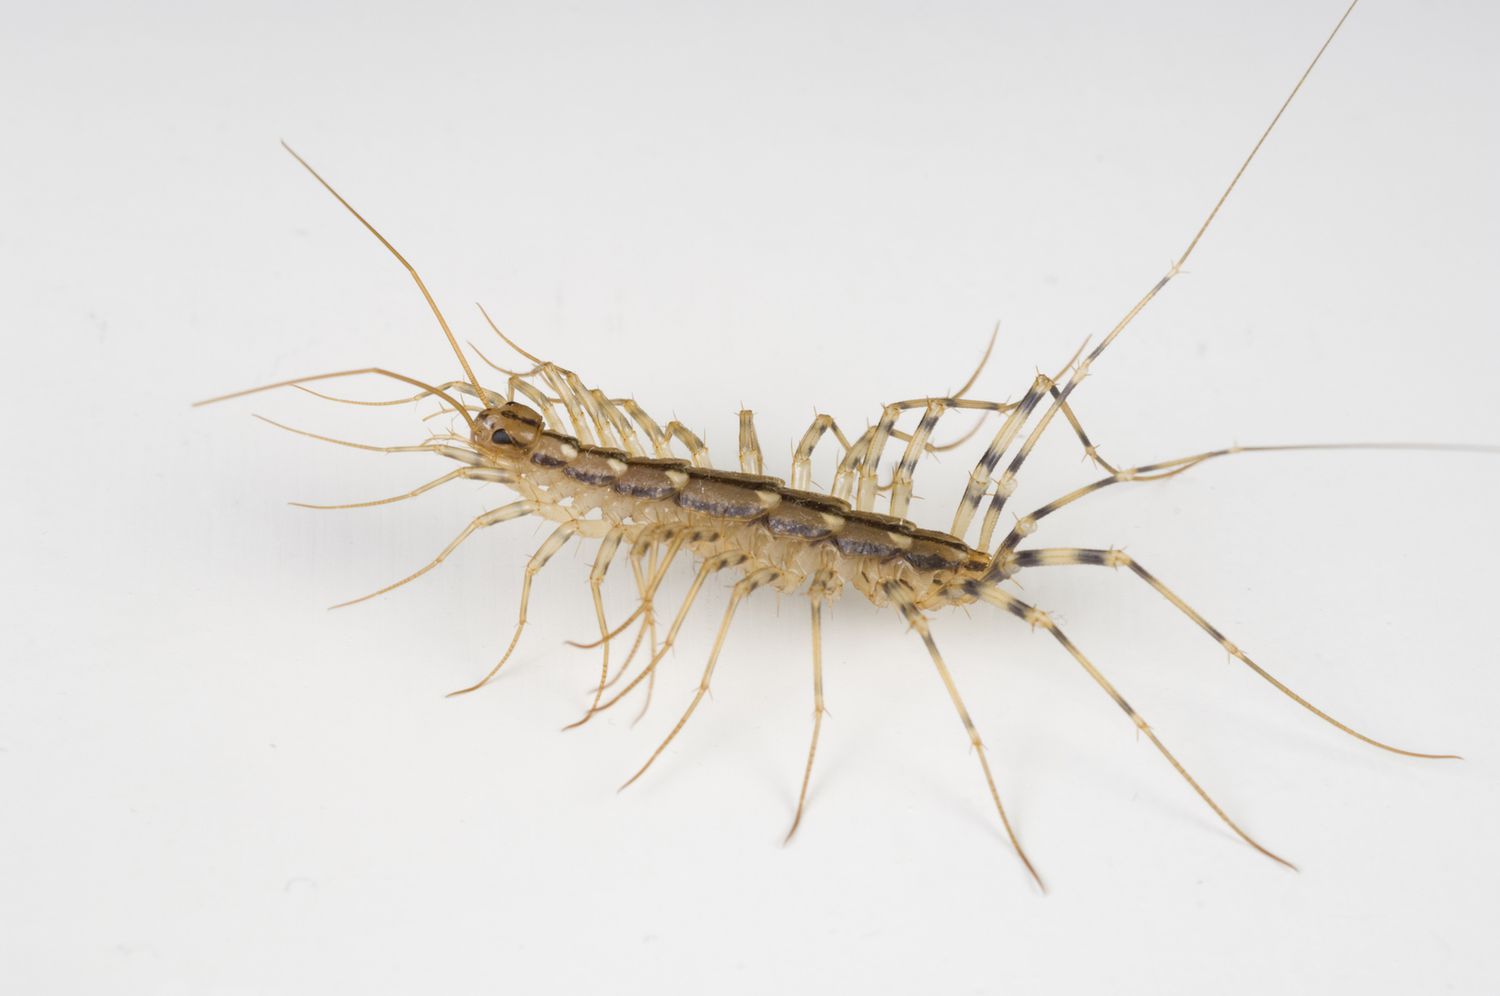 How To Get Rid Of House Centipedes